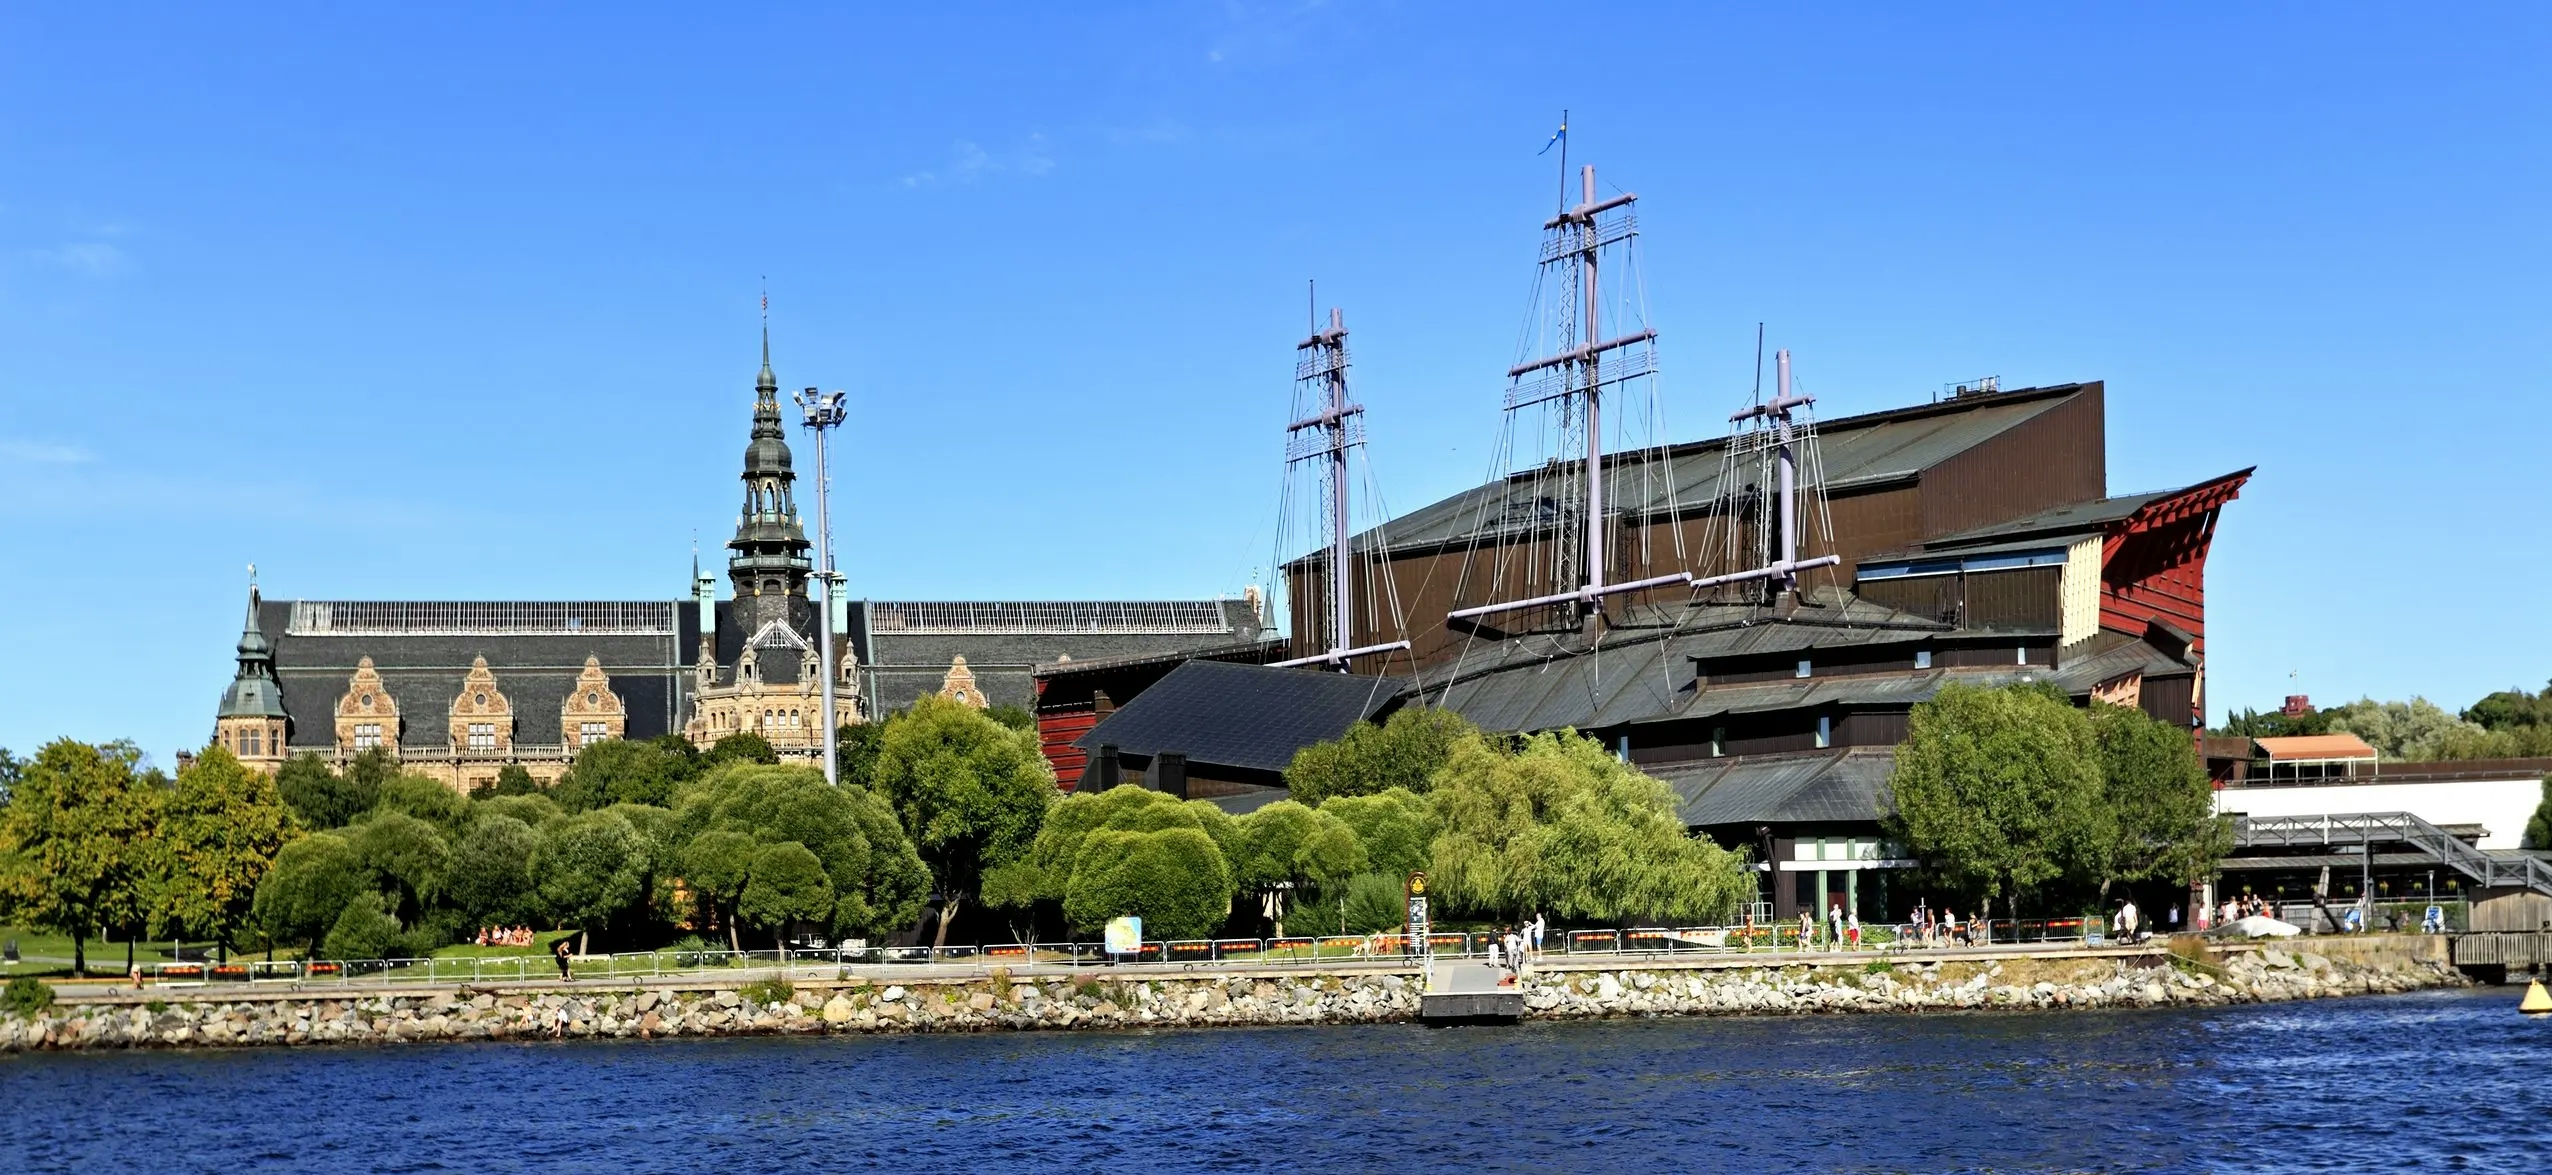 A Traveler's Guide To The Vasa Museum In Stockholm